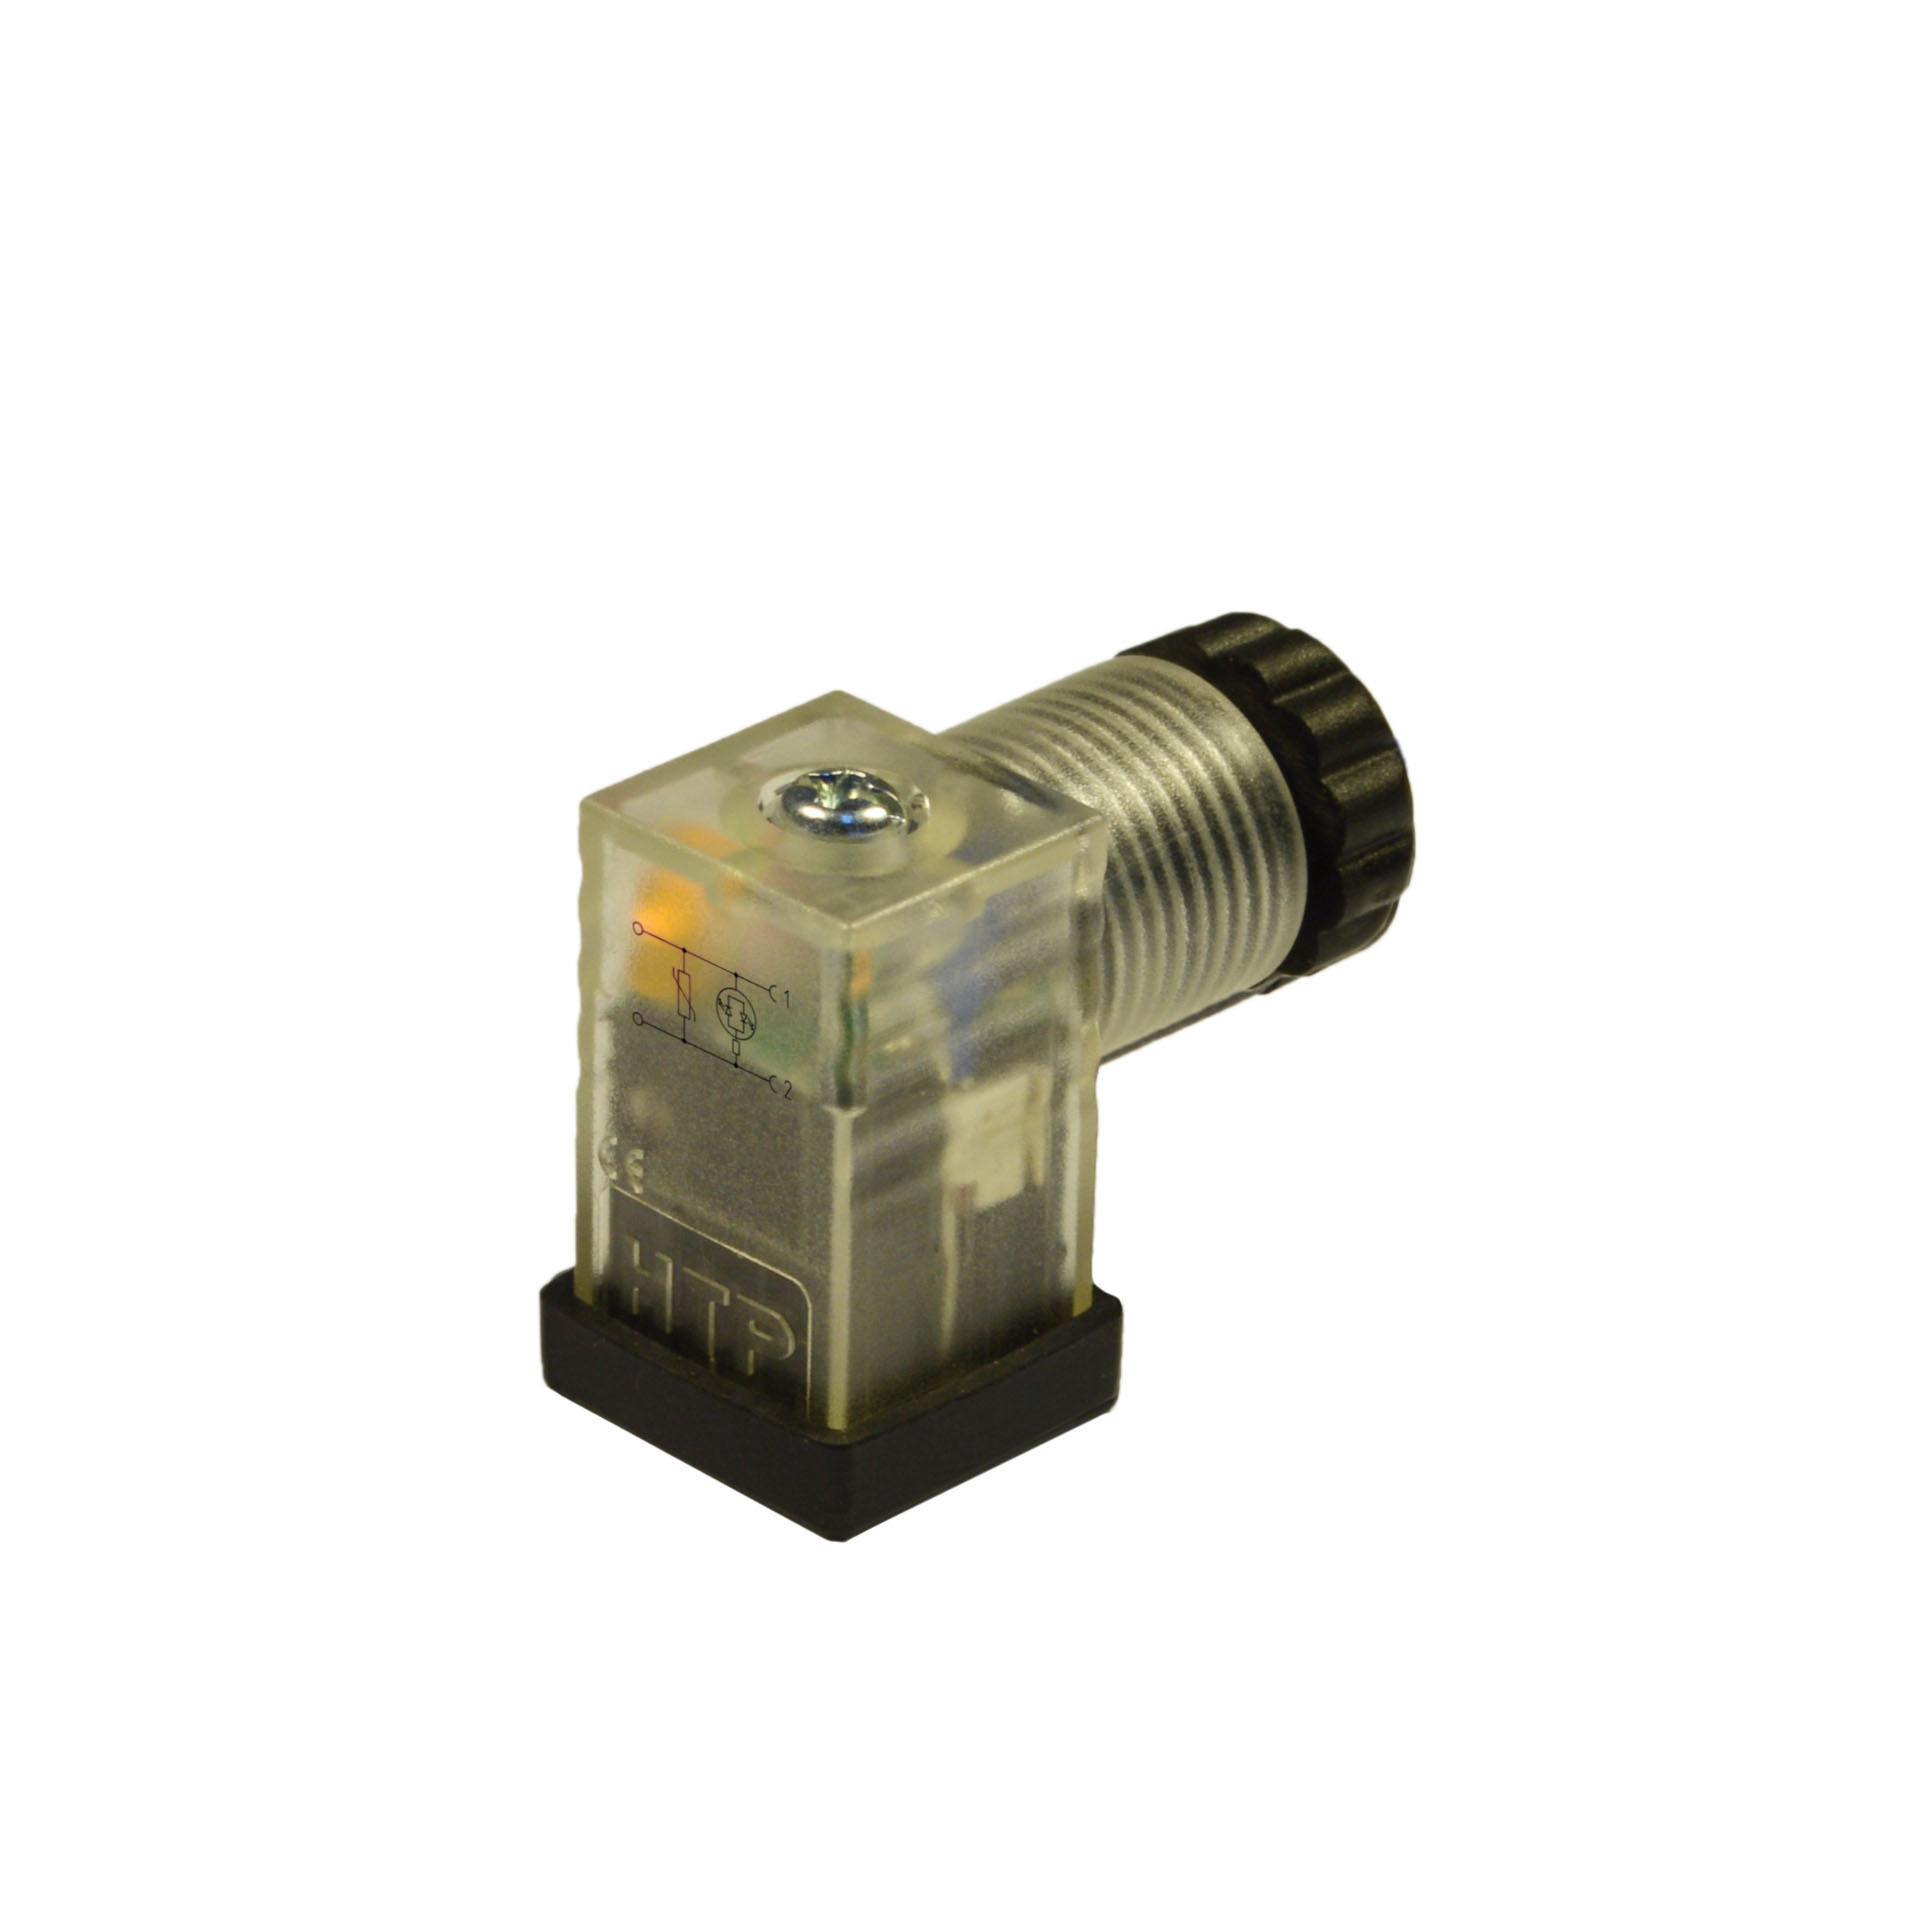 Industrial standard(typeC)field attachable,2p+PE(h.6),yellow LED+vdr,115VAC/DC,PG7